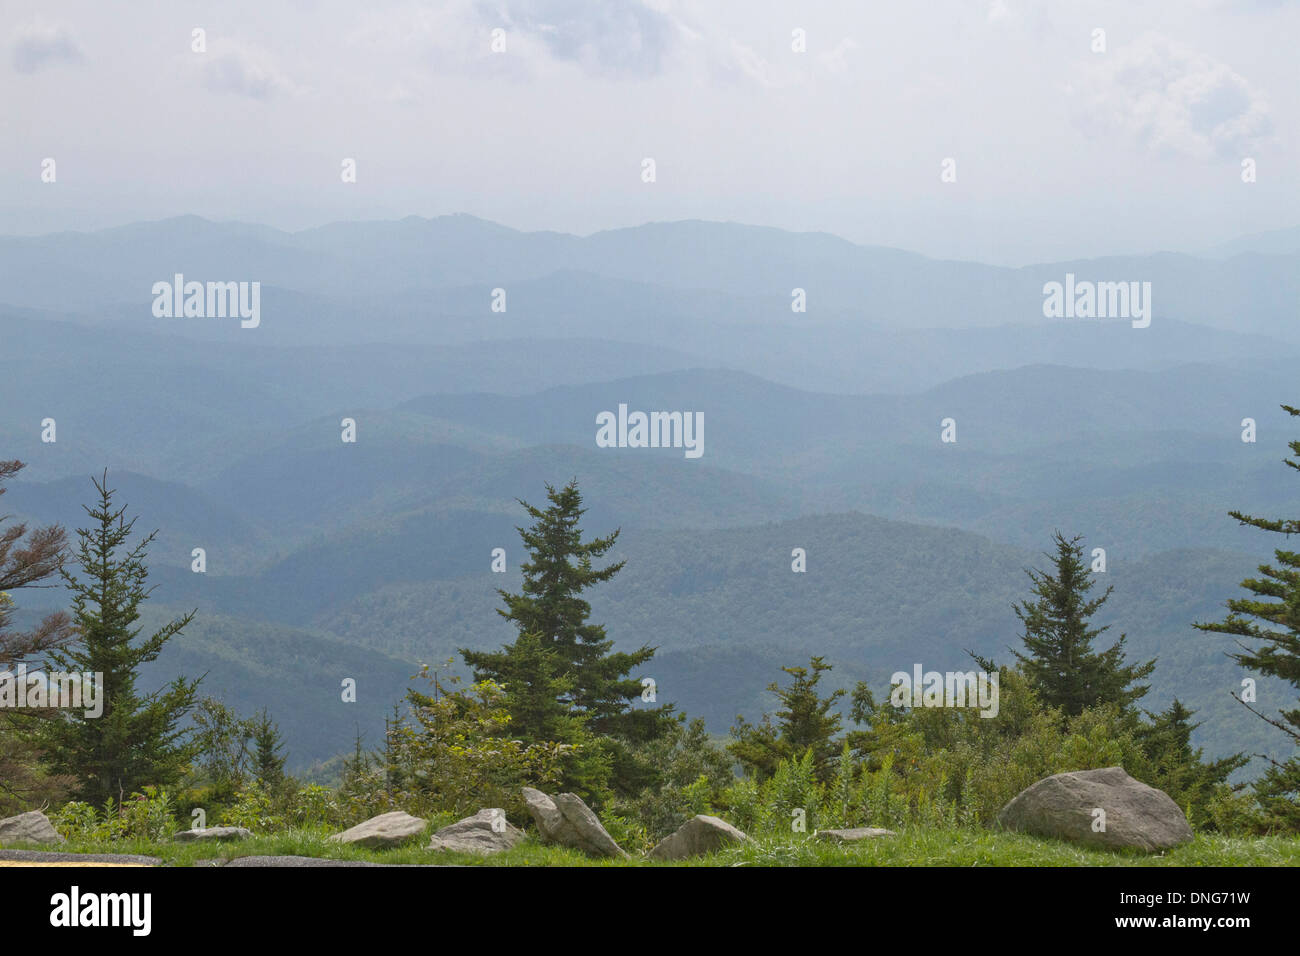 Waves of Blue Ridge Mountains with pines in the foreground in western North Carolina Stock Photo